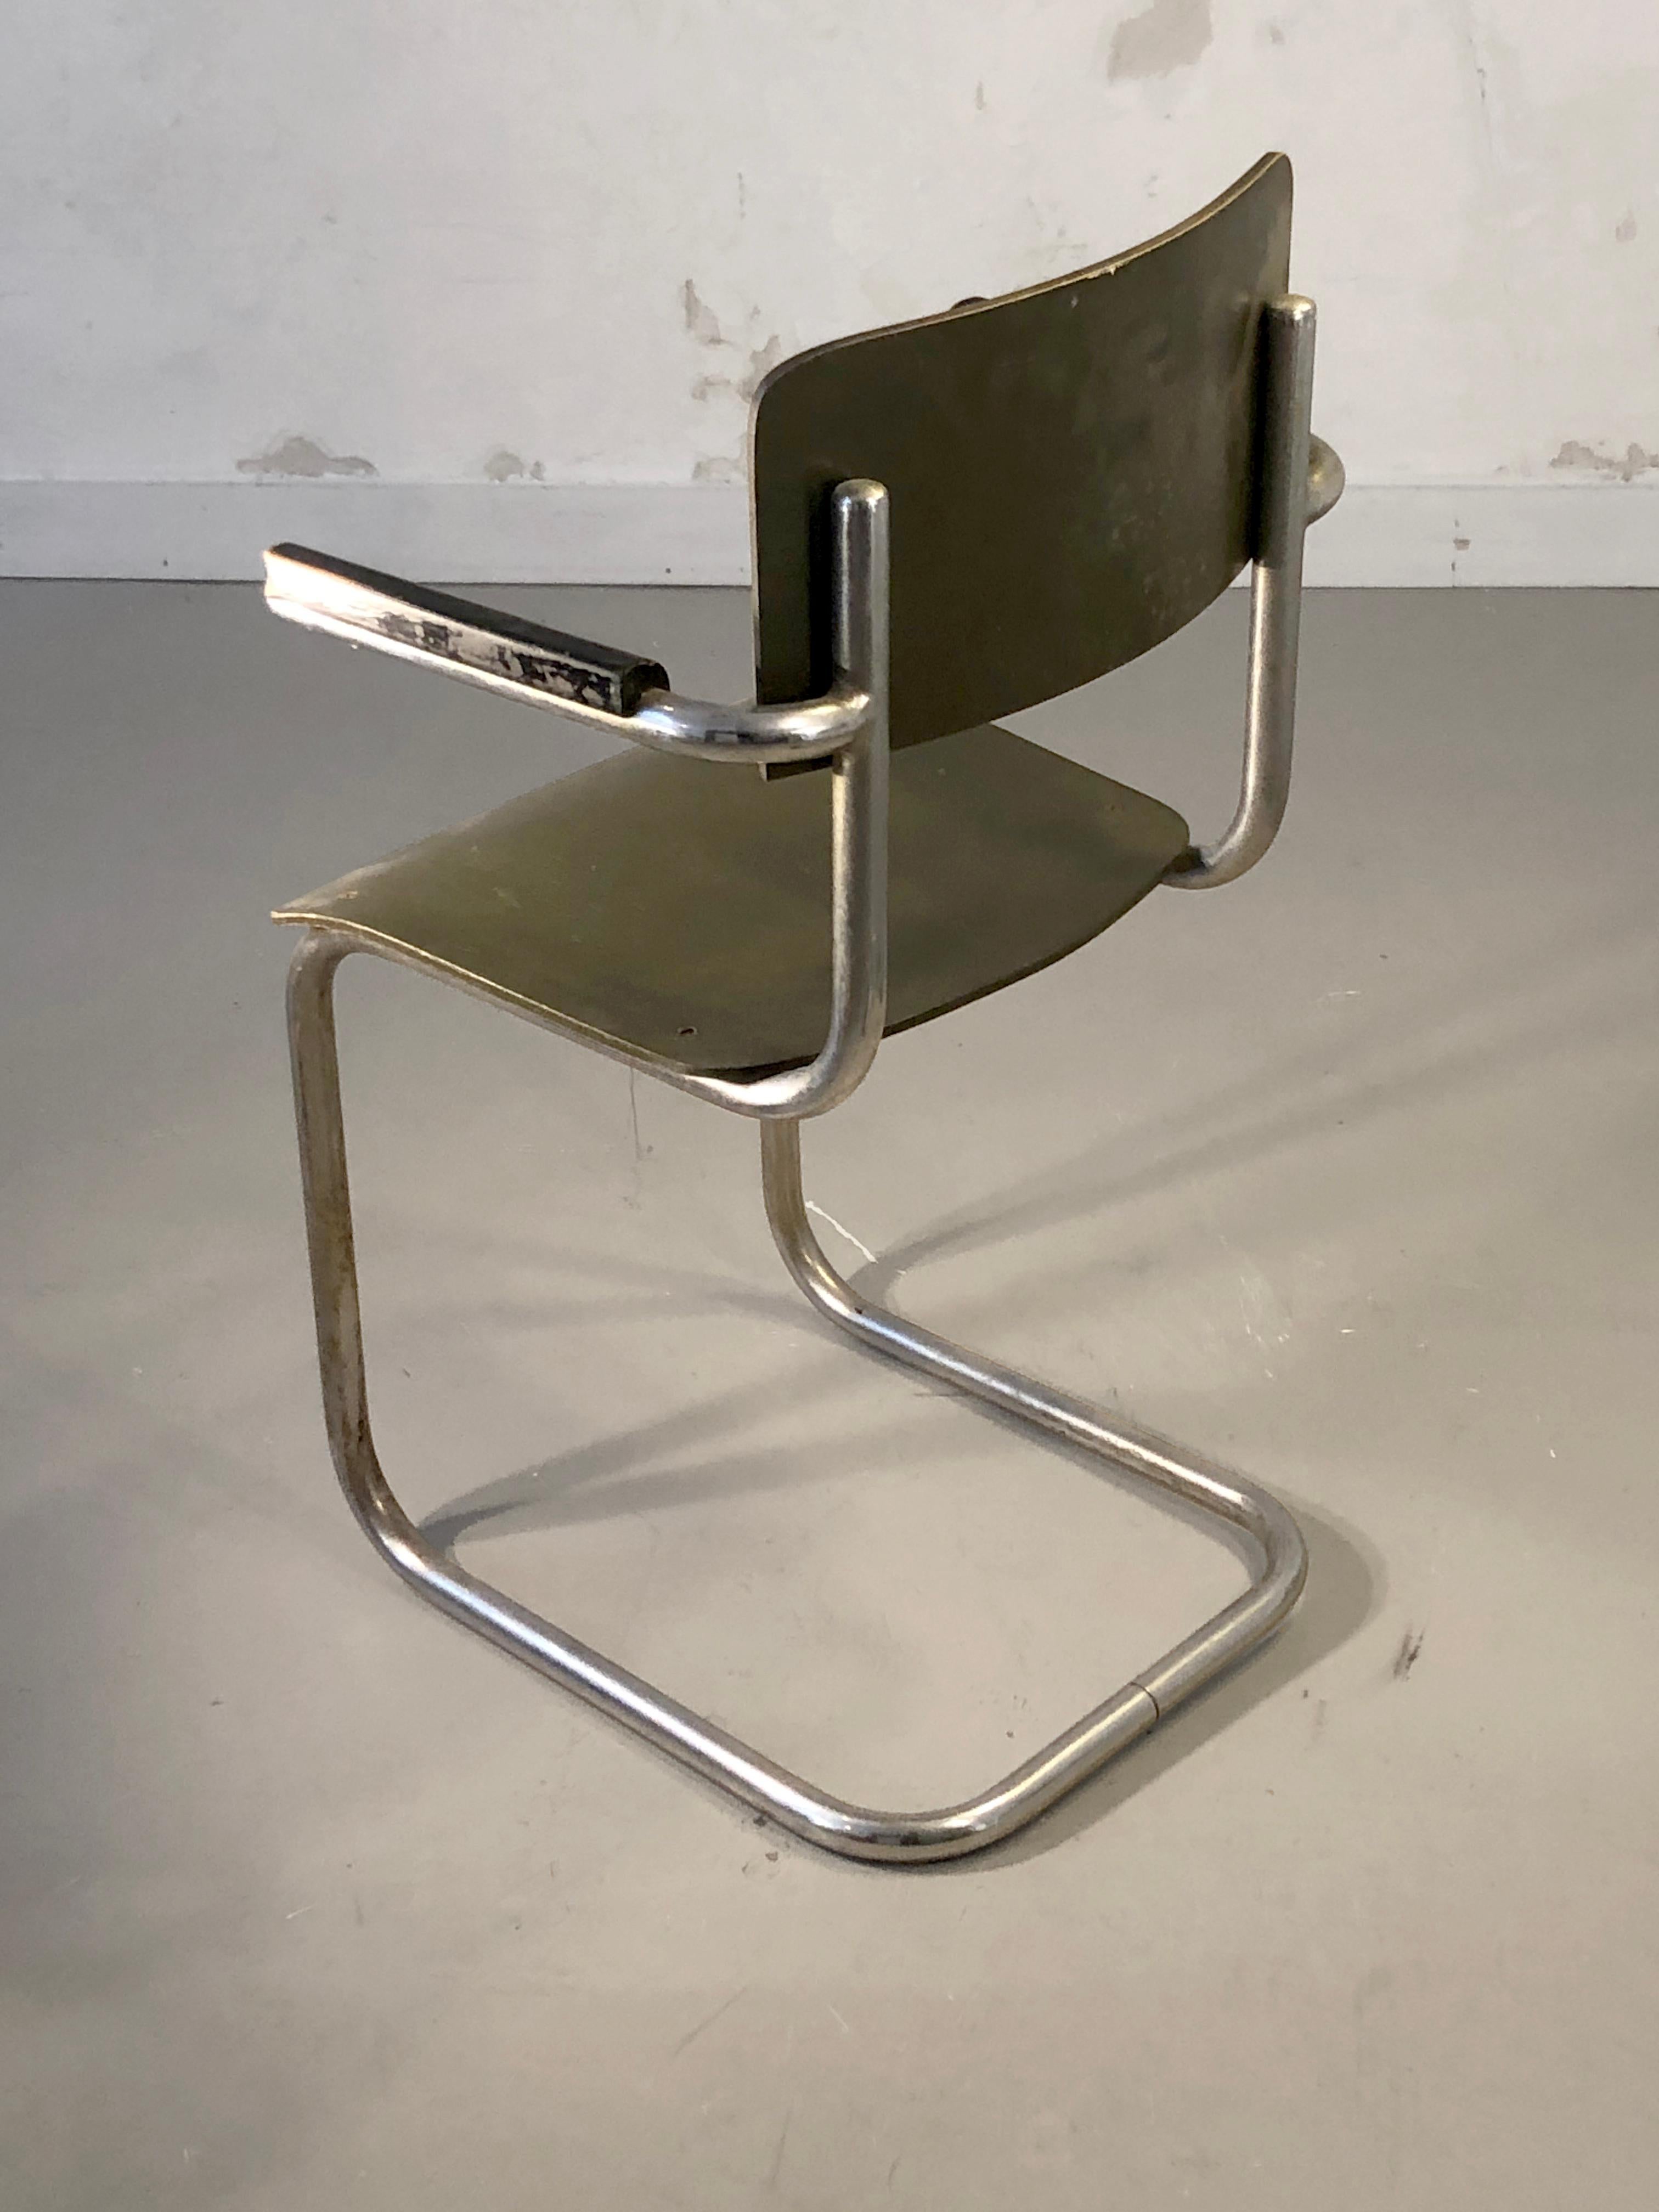 Wood An Early MODERNIST BAUHAUS CHAIR by MART STAM for MAUSER WERKE, Germany 1930 For Sale